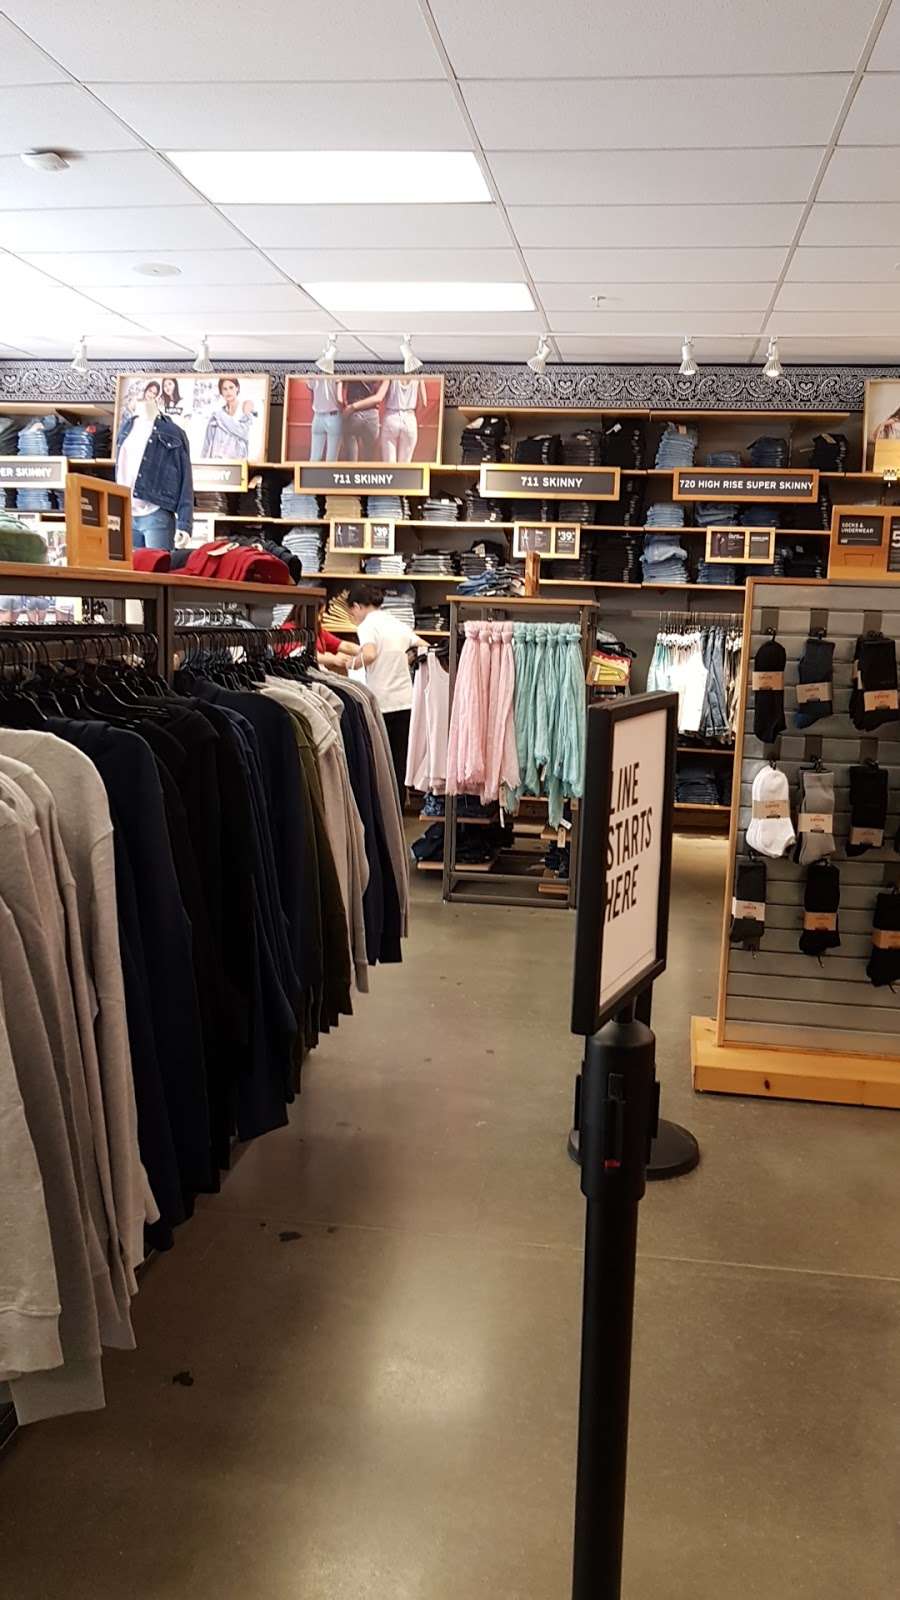 levis outlet usa